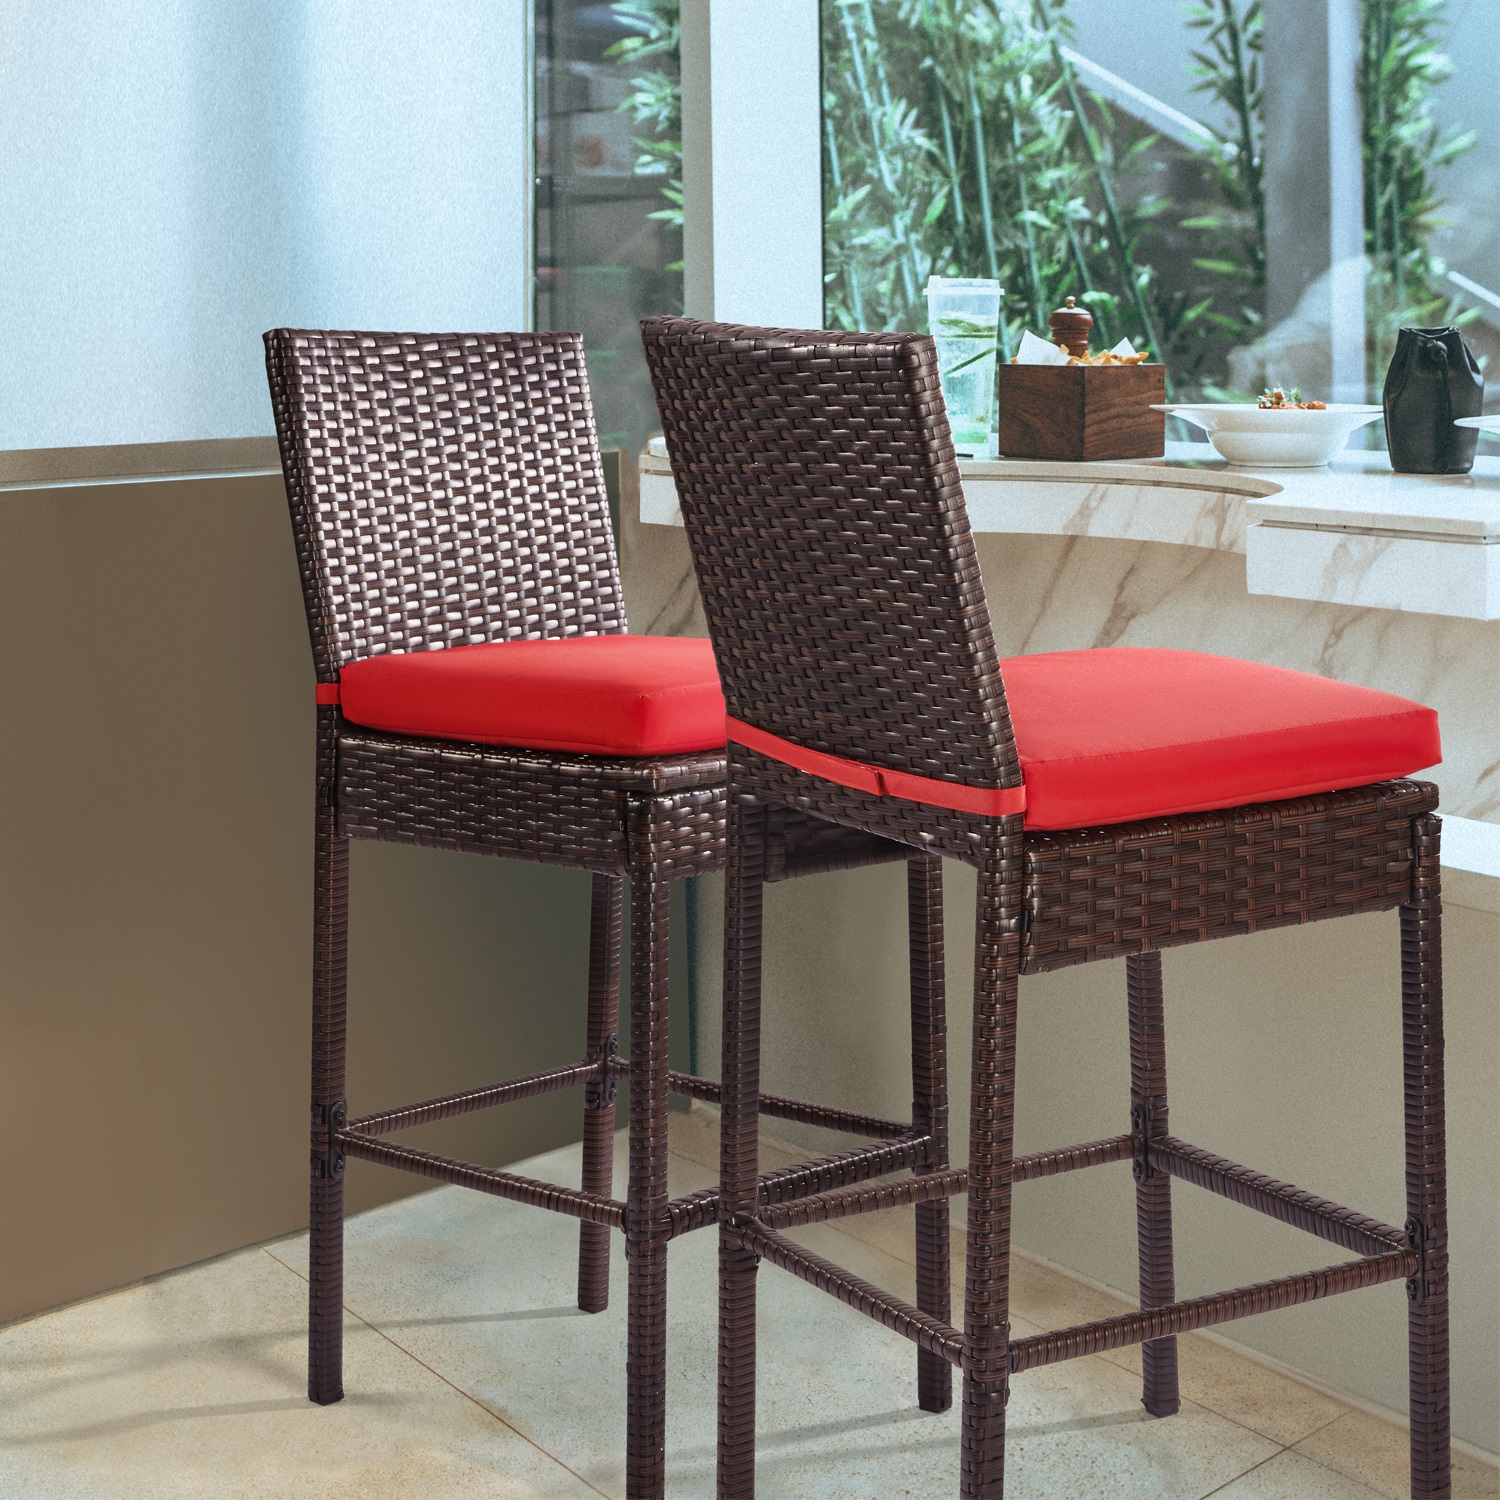 Patio Stools & Bar Chairs Outdoor Wicker Bar Stools Set of 2 Counter Height Bar Stools Patio Chairs Bar Height with Footrest Armless Cushion Red All Weather Rattan for Garden Pool Lawn Backyard - image 3 of 7